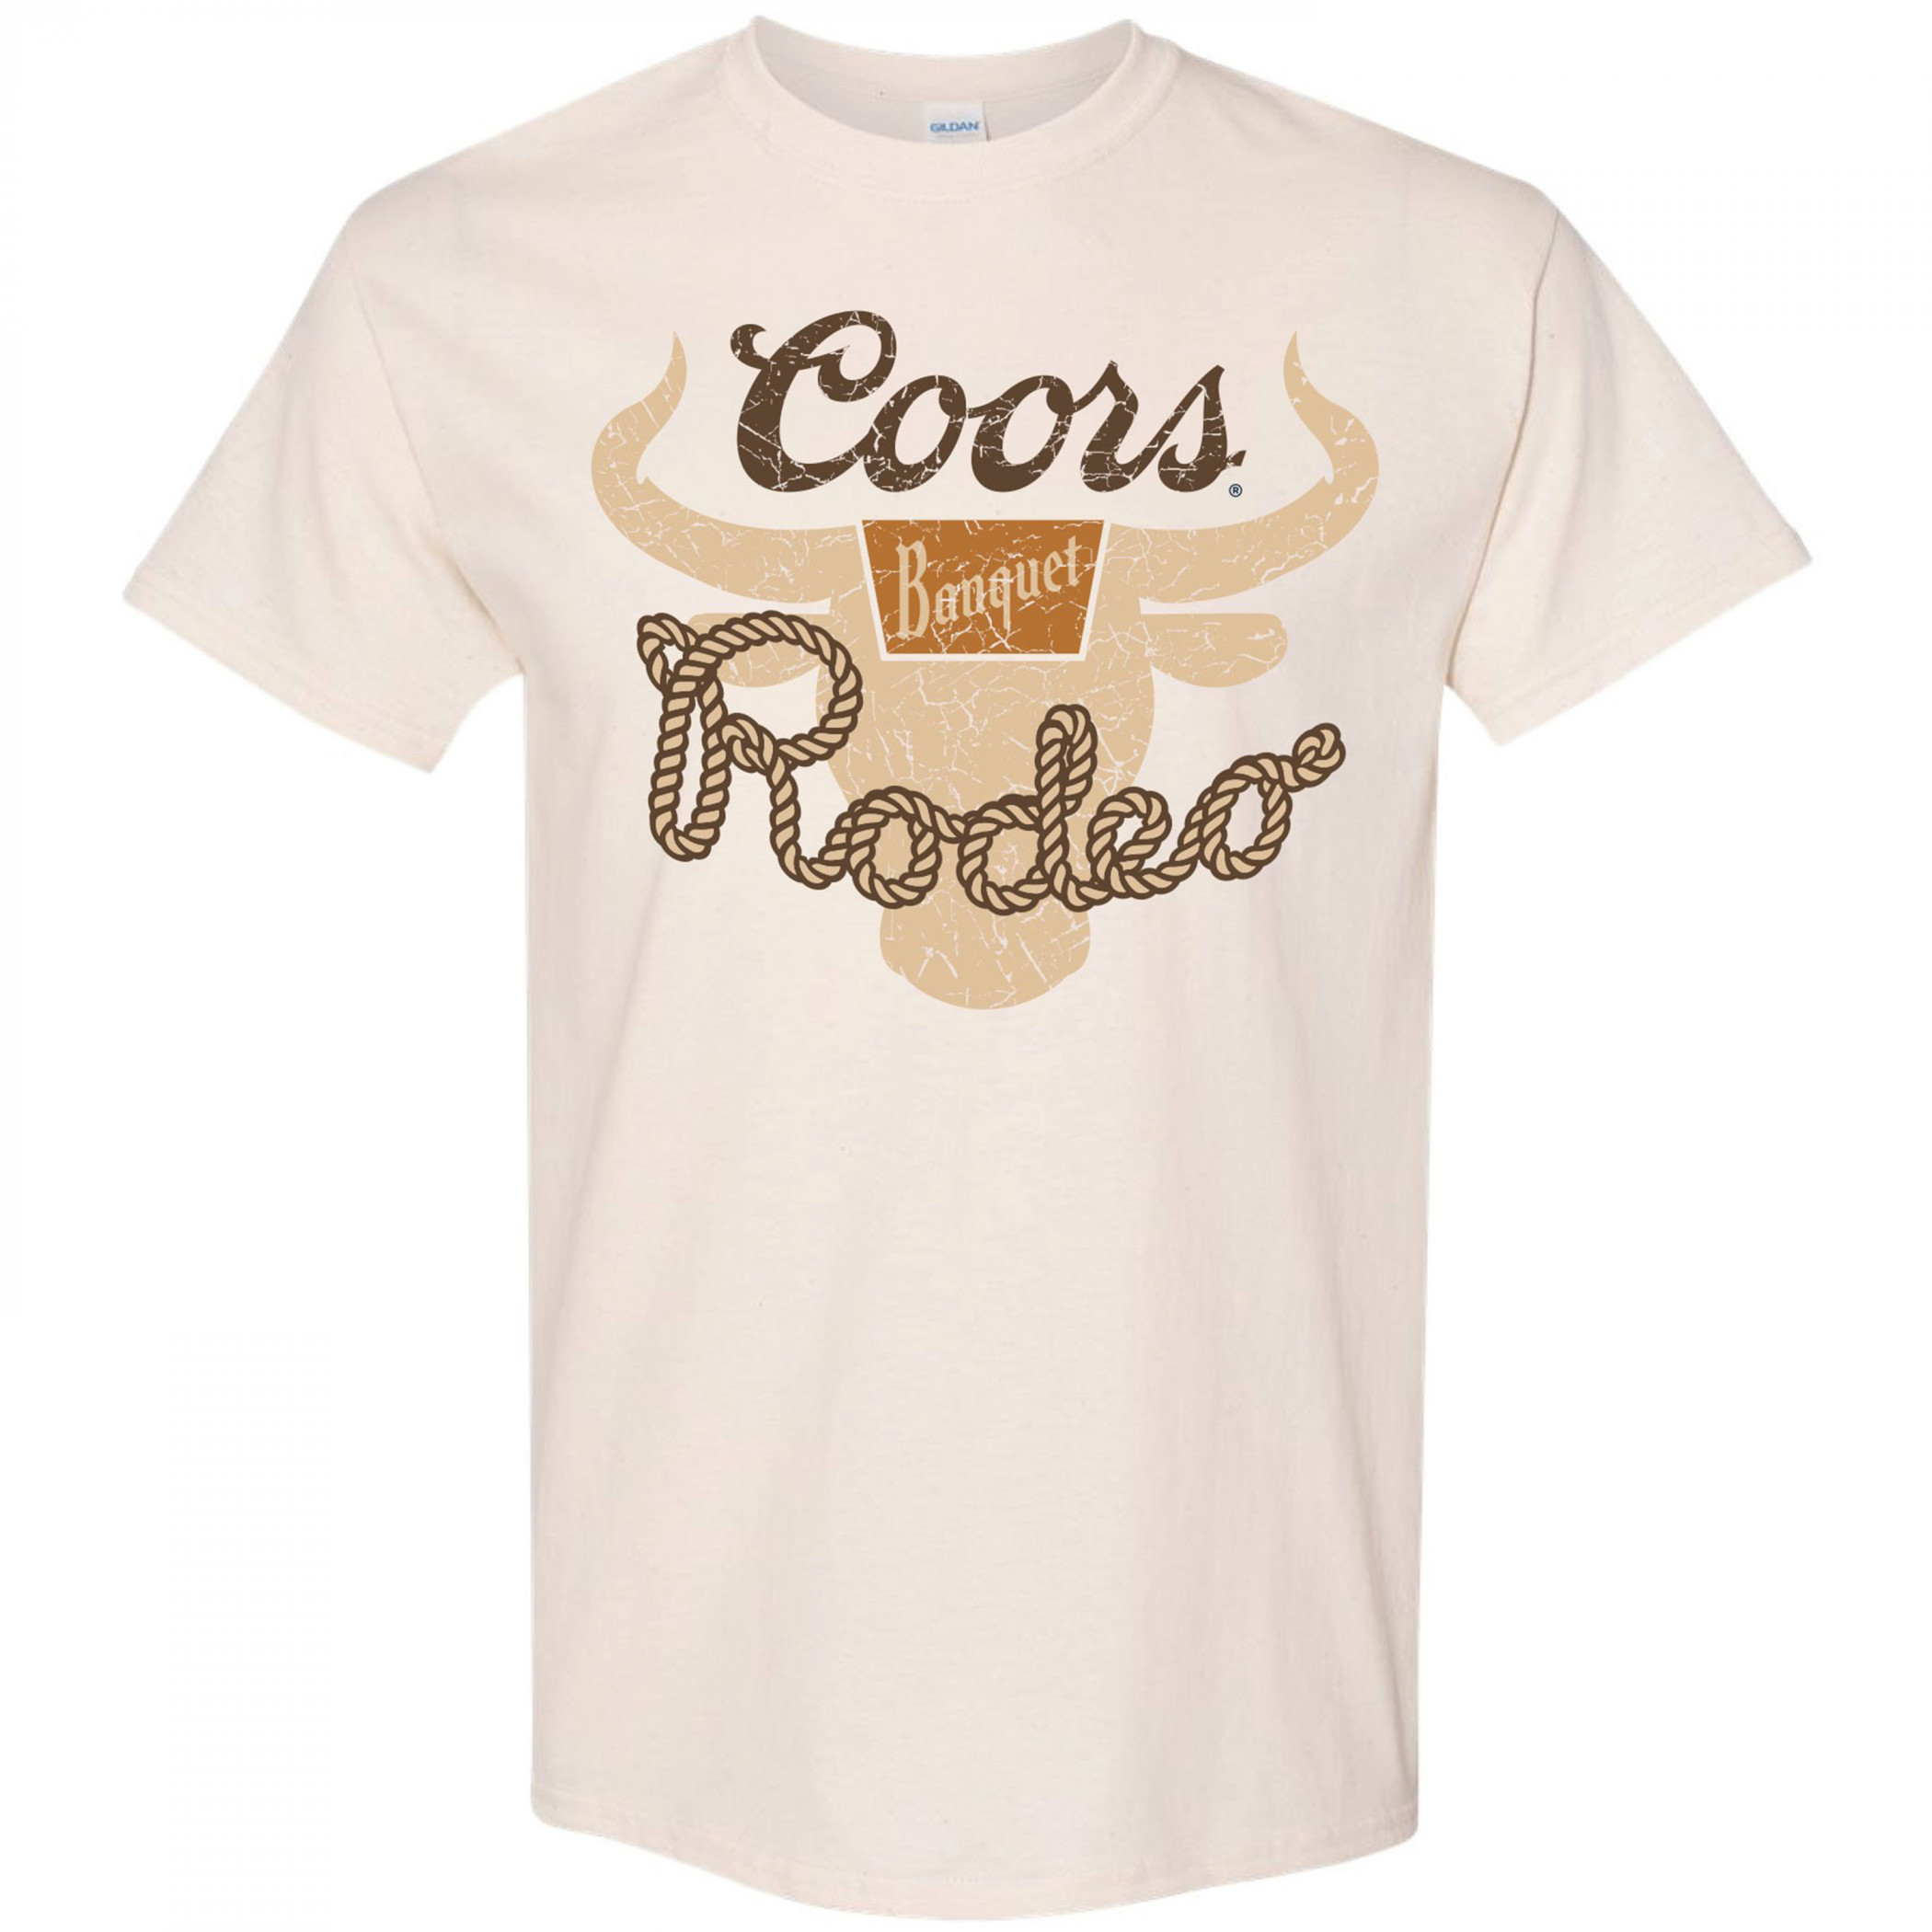 Coors Banquet Rodeo Lasso Cream Colorway T-Shirt